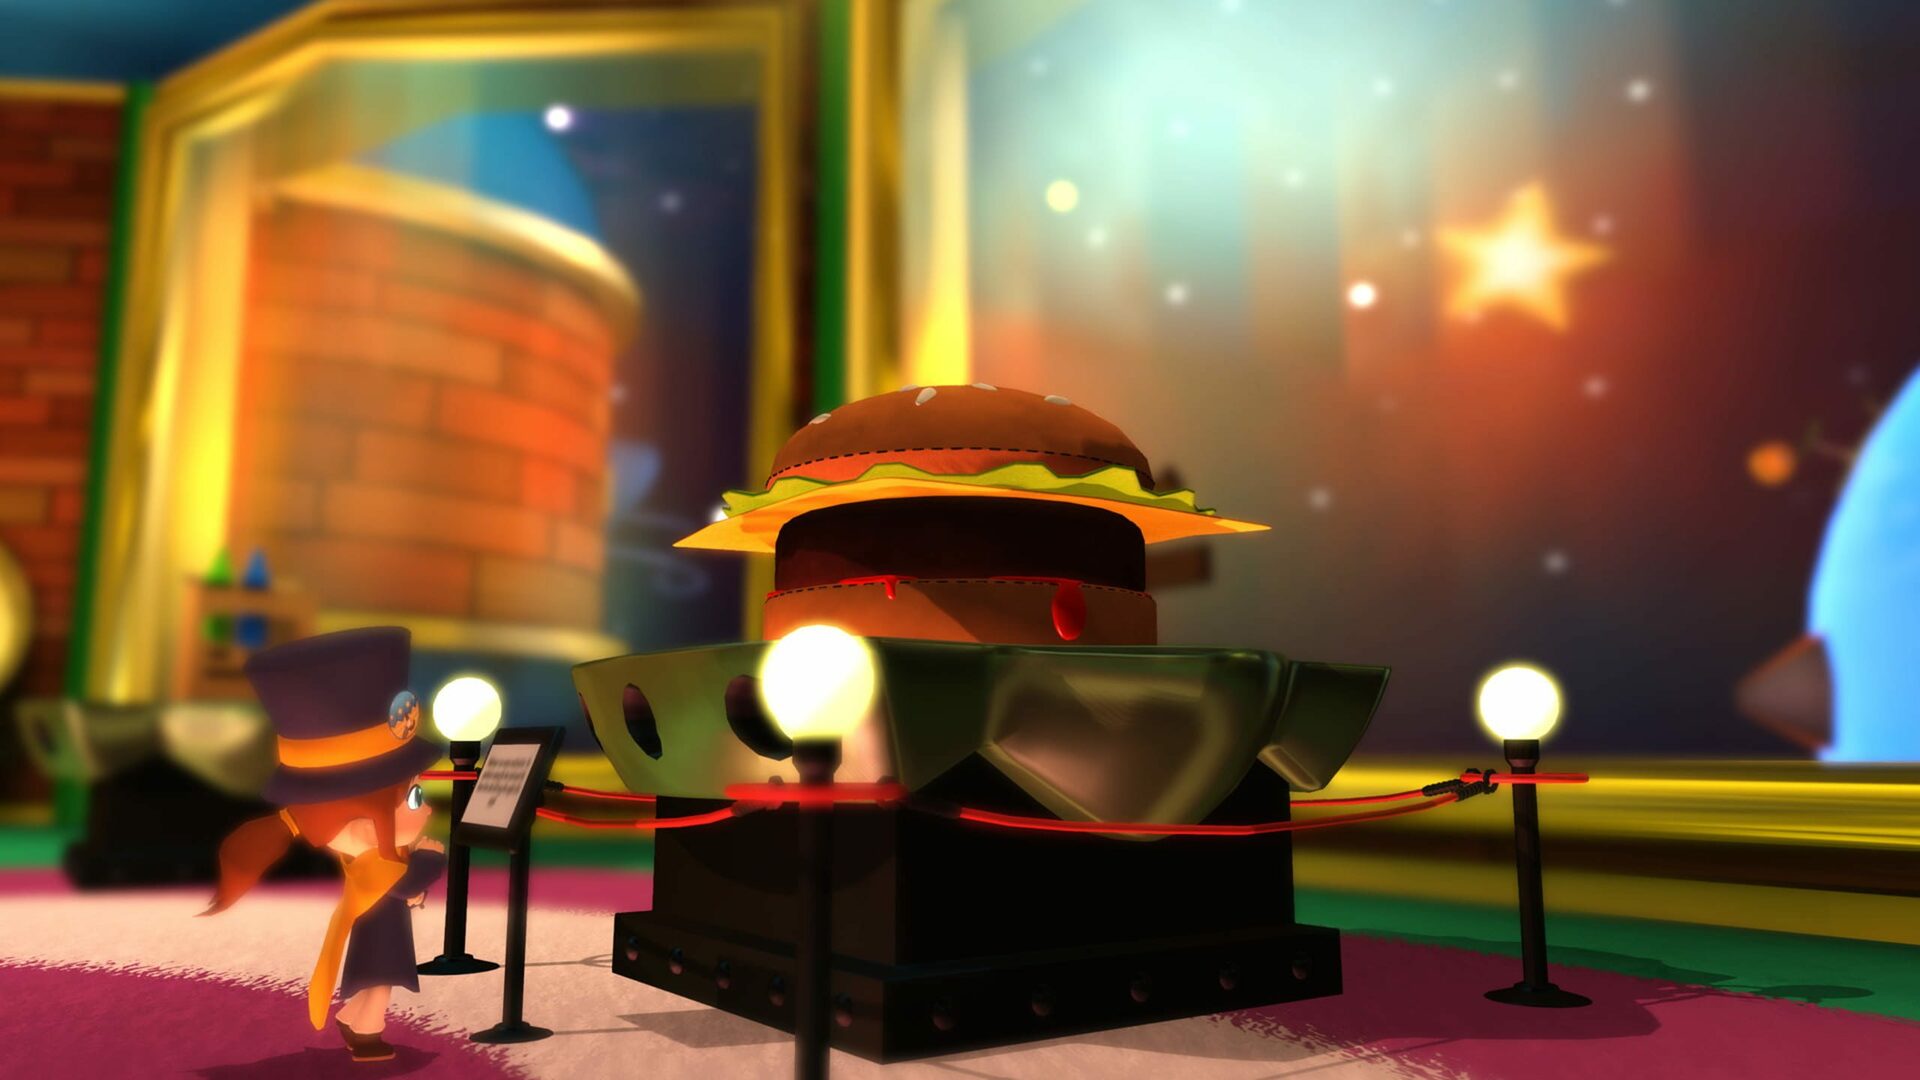 A Hat in Time - Ultimate Edition